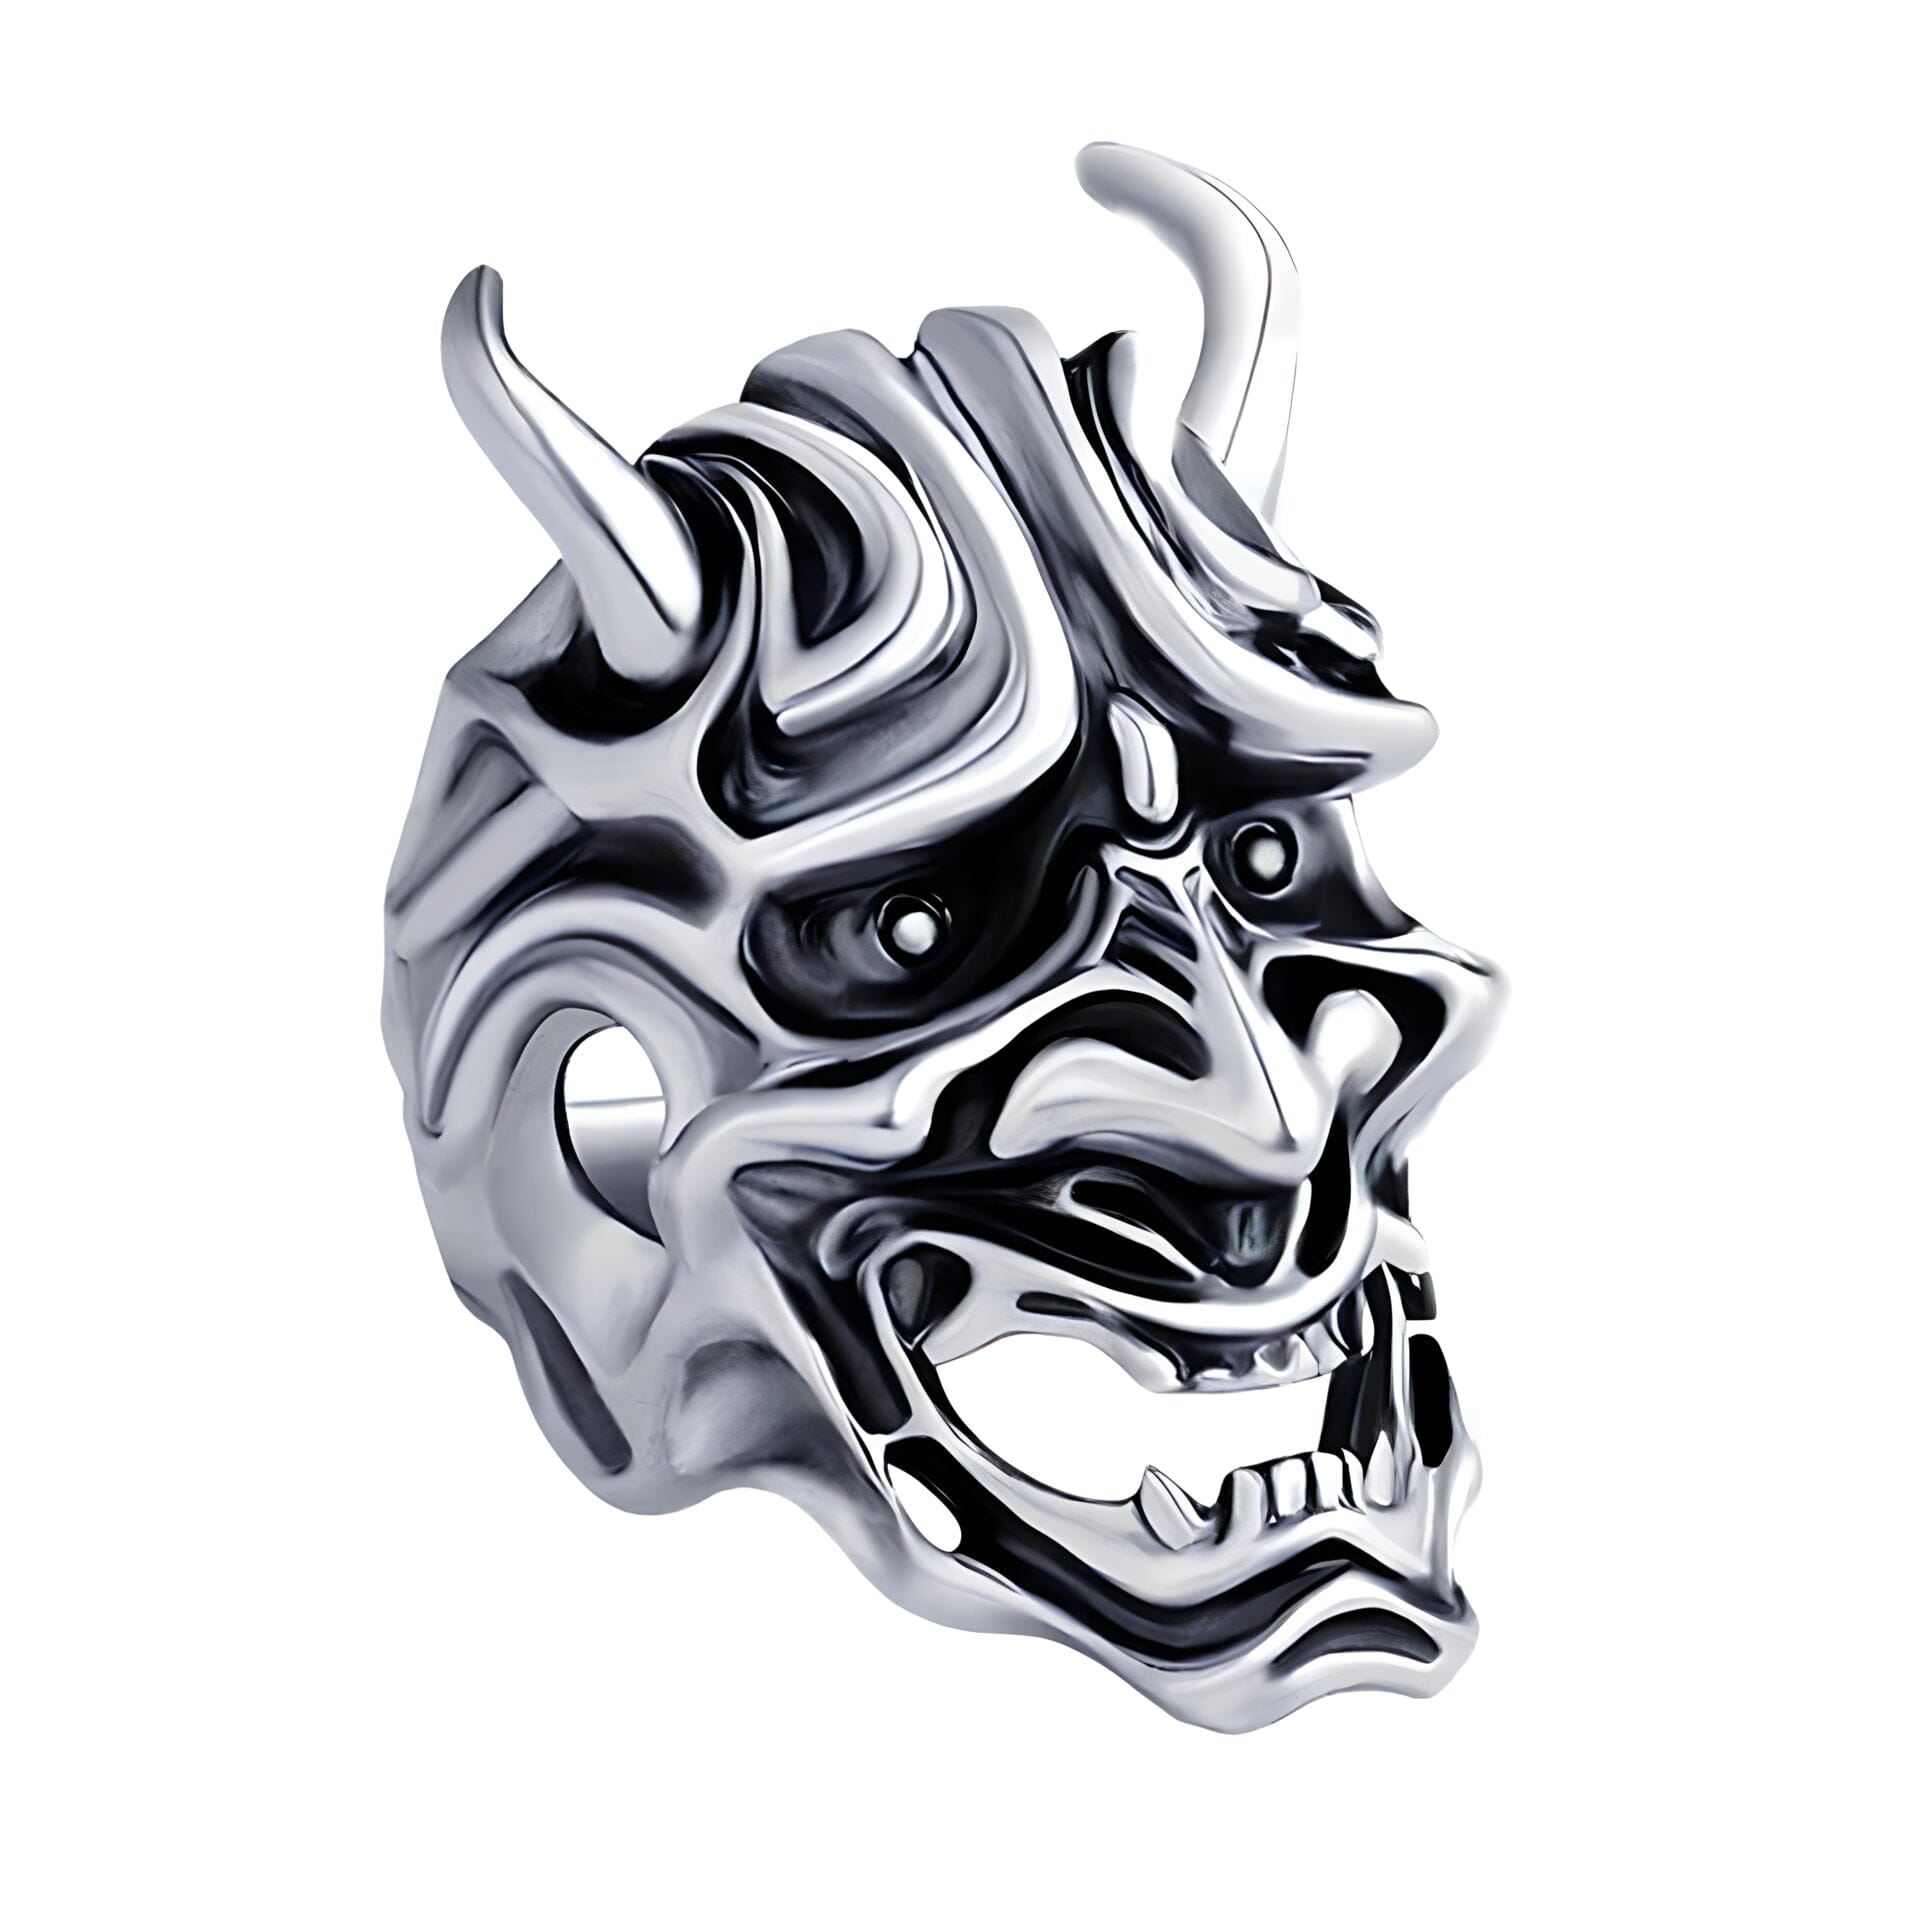 The Bushido Ring EVBEA Skull Jewelry Directly-Operated Store 10 